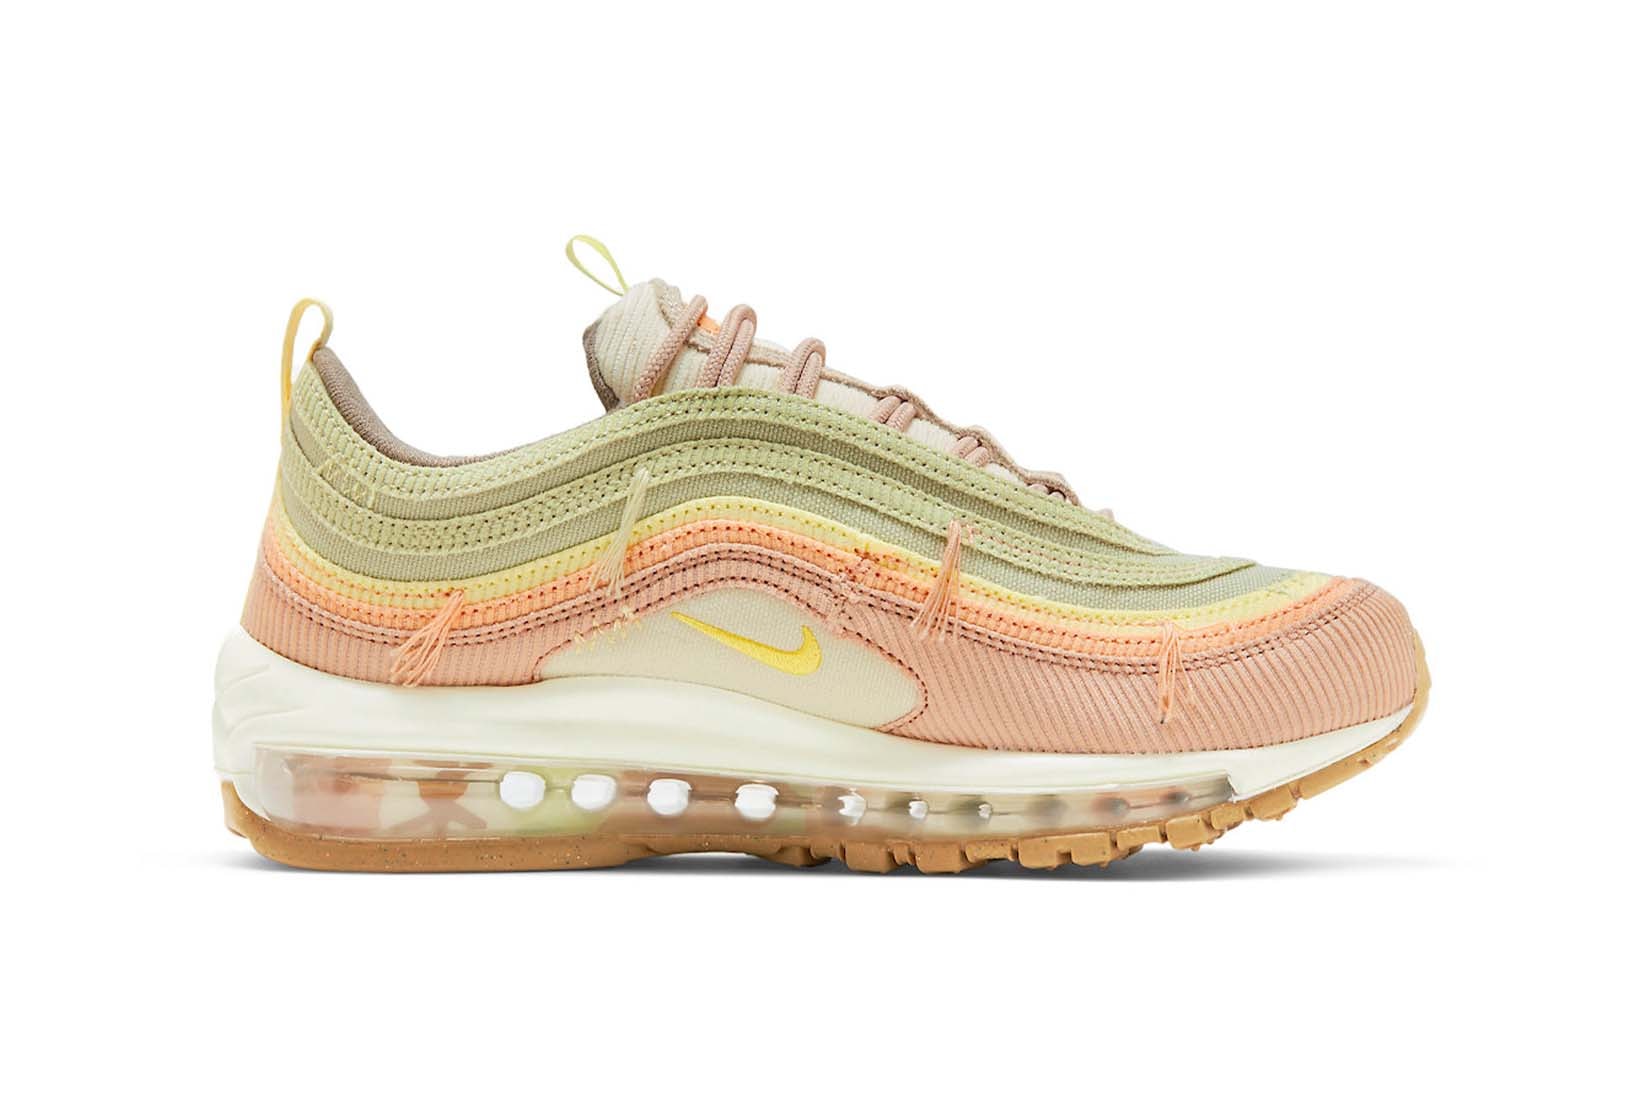 Nike Air Max 97 Bright Side Corduroy Sustainable Price Release Date